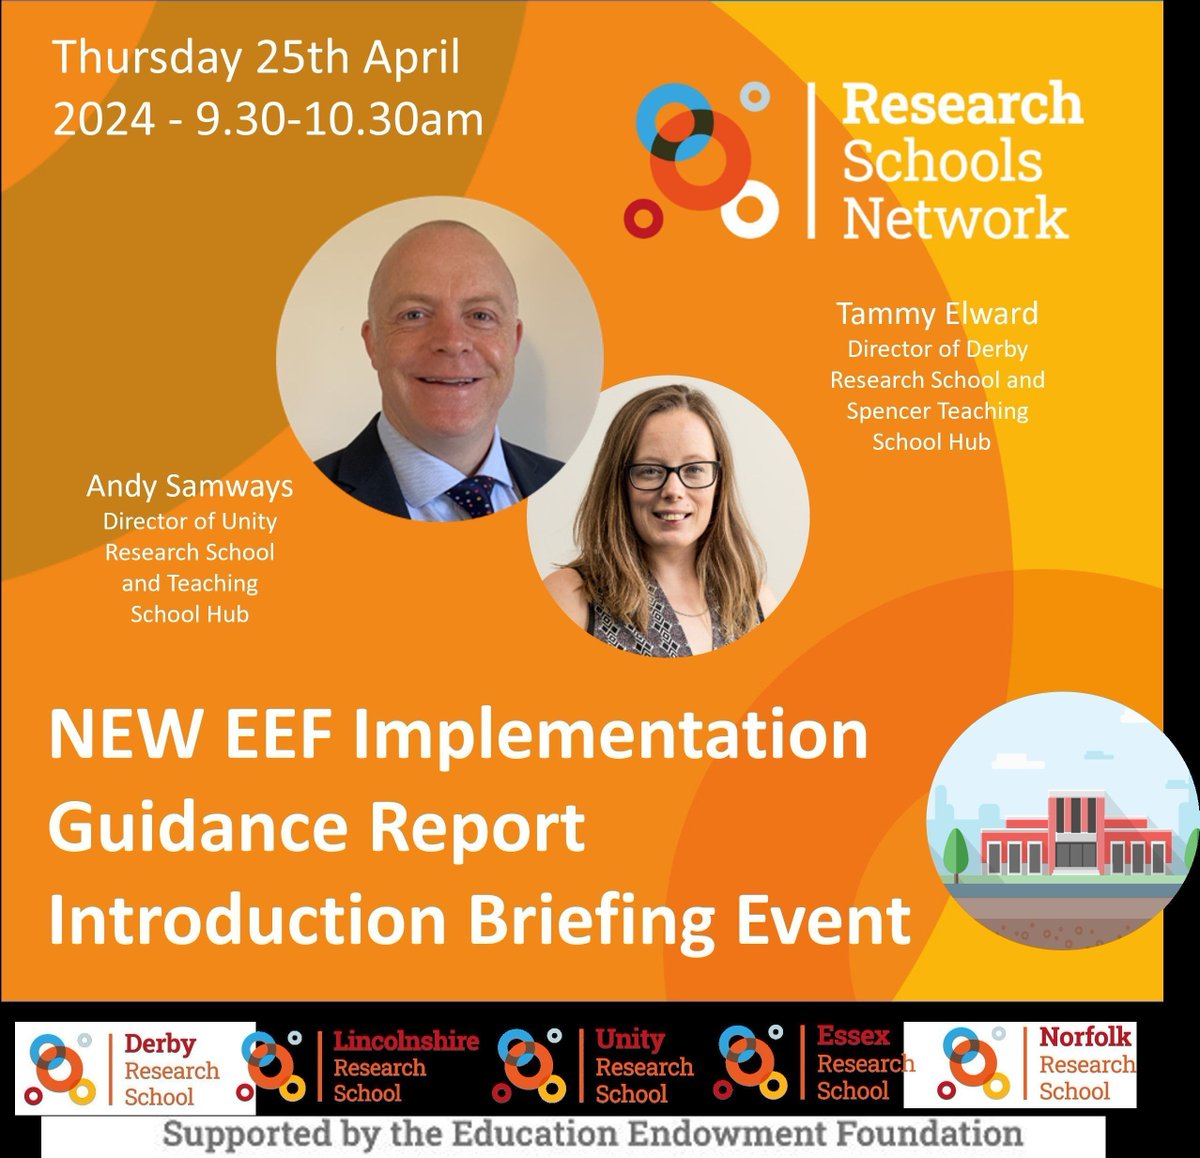 Would you like to attend a free Introduction Briefing Event for the new @EducEndoFoundn Implementation Guidance Report tomorrow? This will be the first in a series of insights into the updates. Book here - buff.ly/3JtYuT9